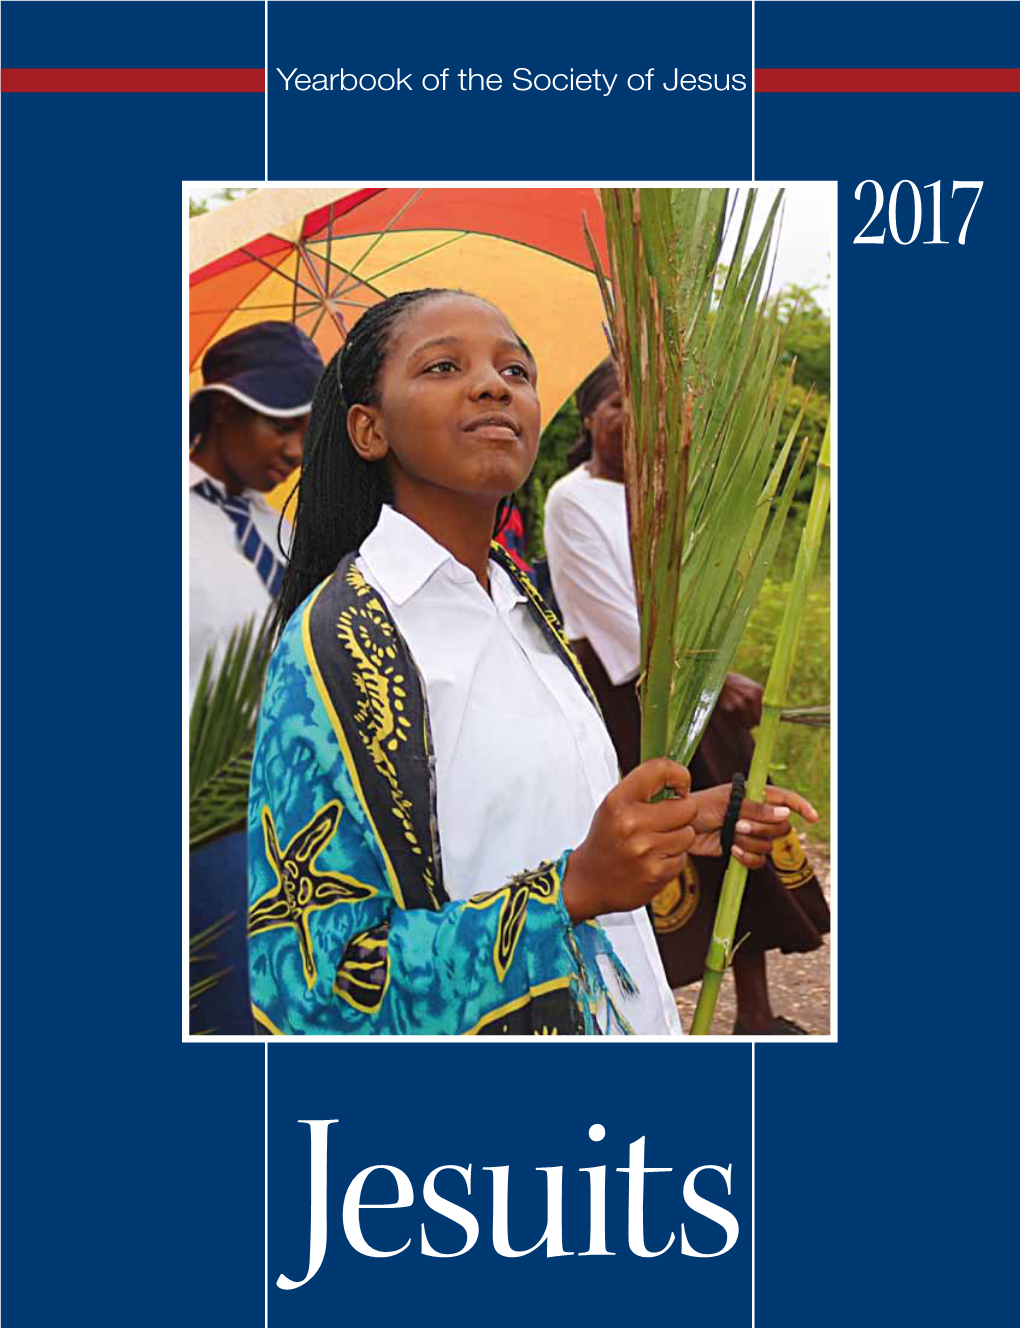 Yearbook 2017 Presents a Community That Recalls That, “As the Society of Jesus, We Are Servants of Christ’S Mission